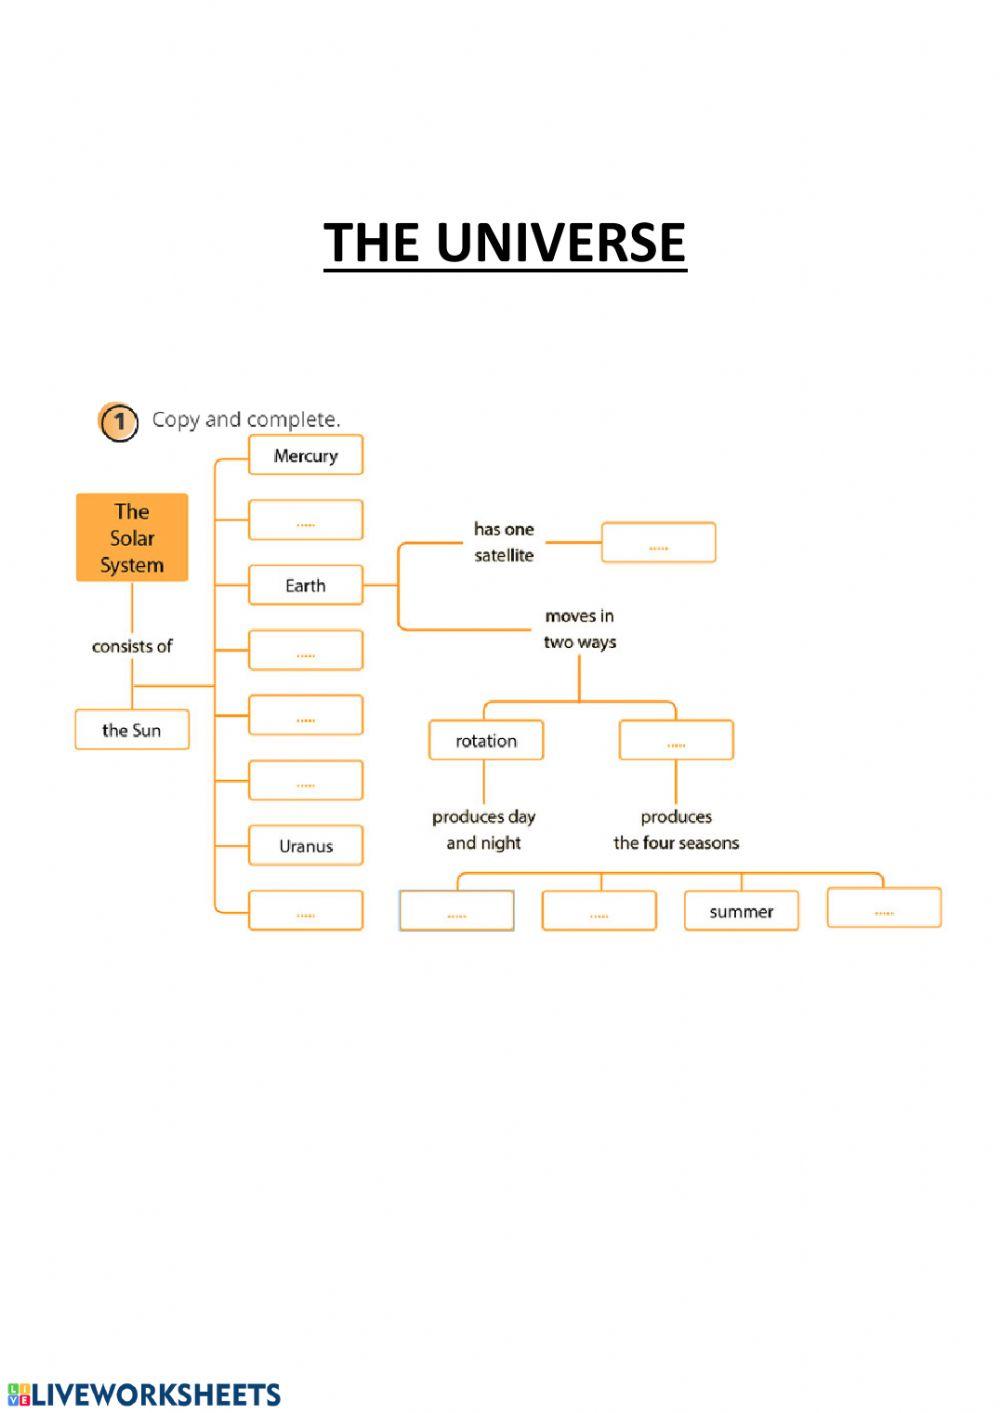 The universe review